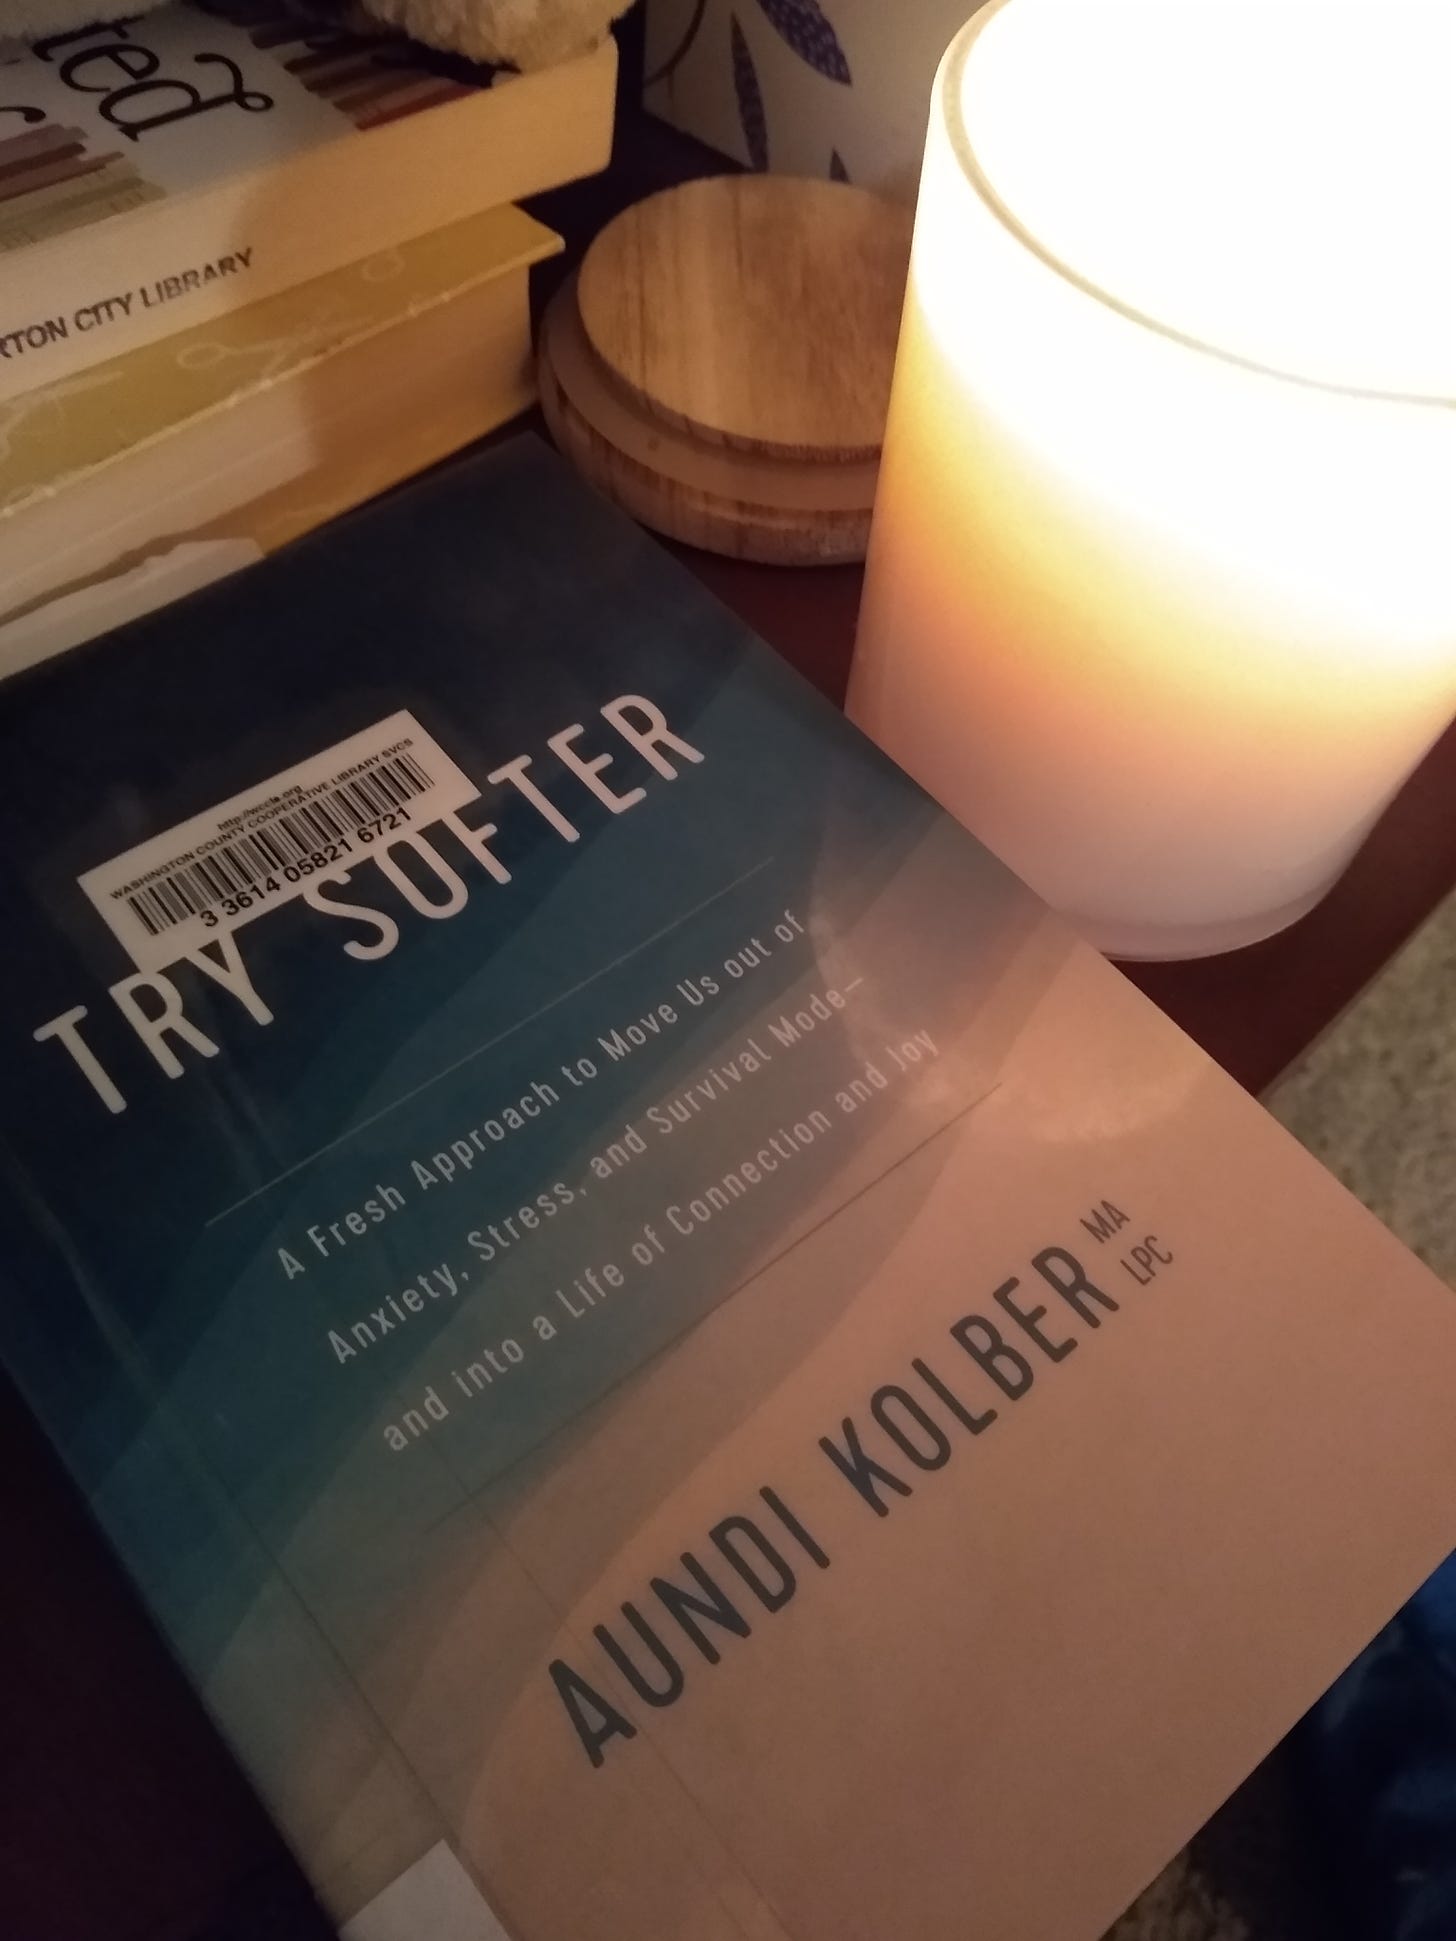 The book Try Softer by Aundi Kolber and a lit candle